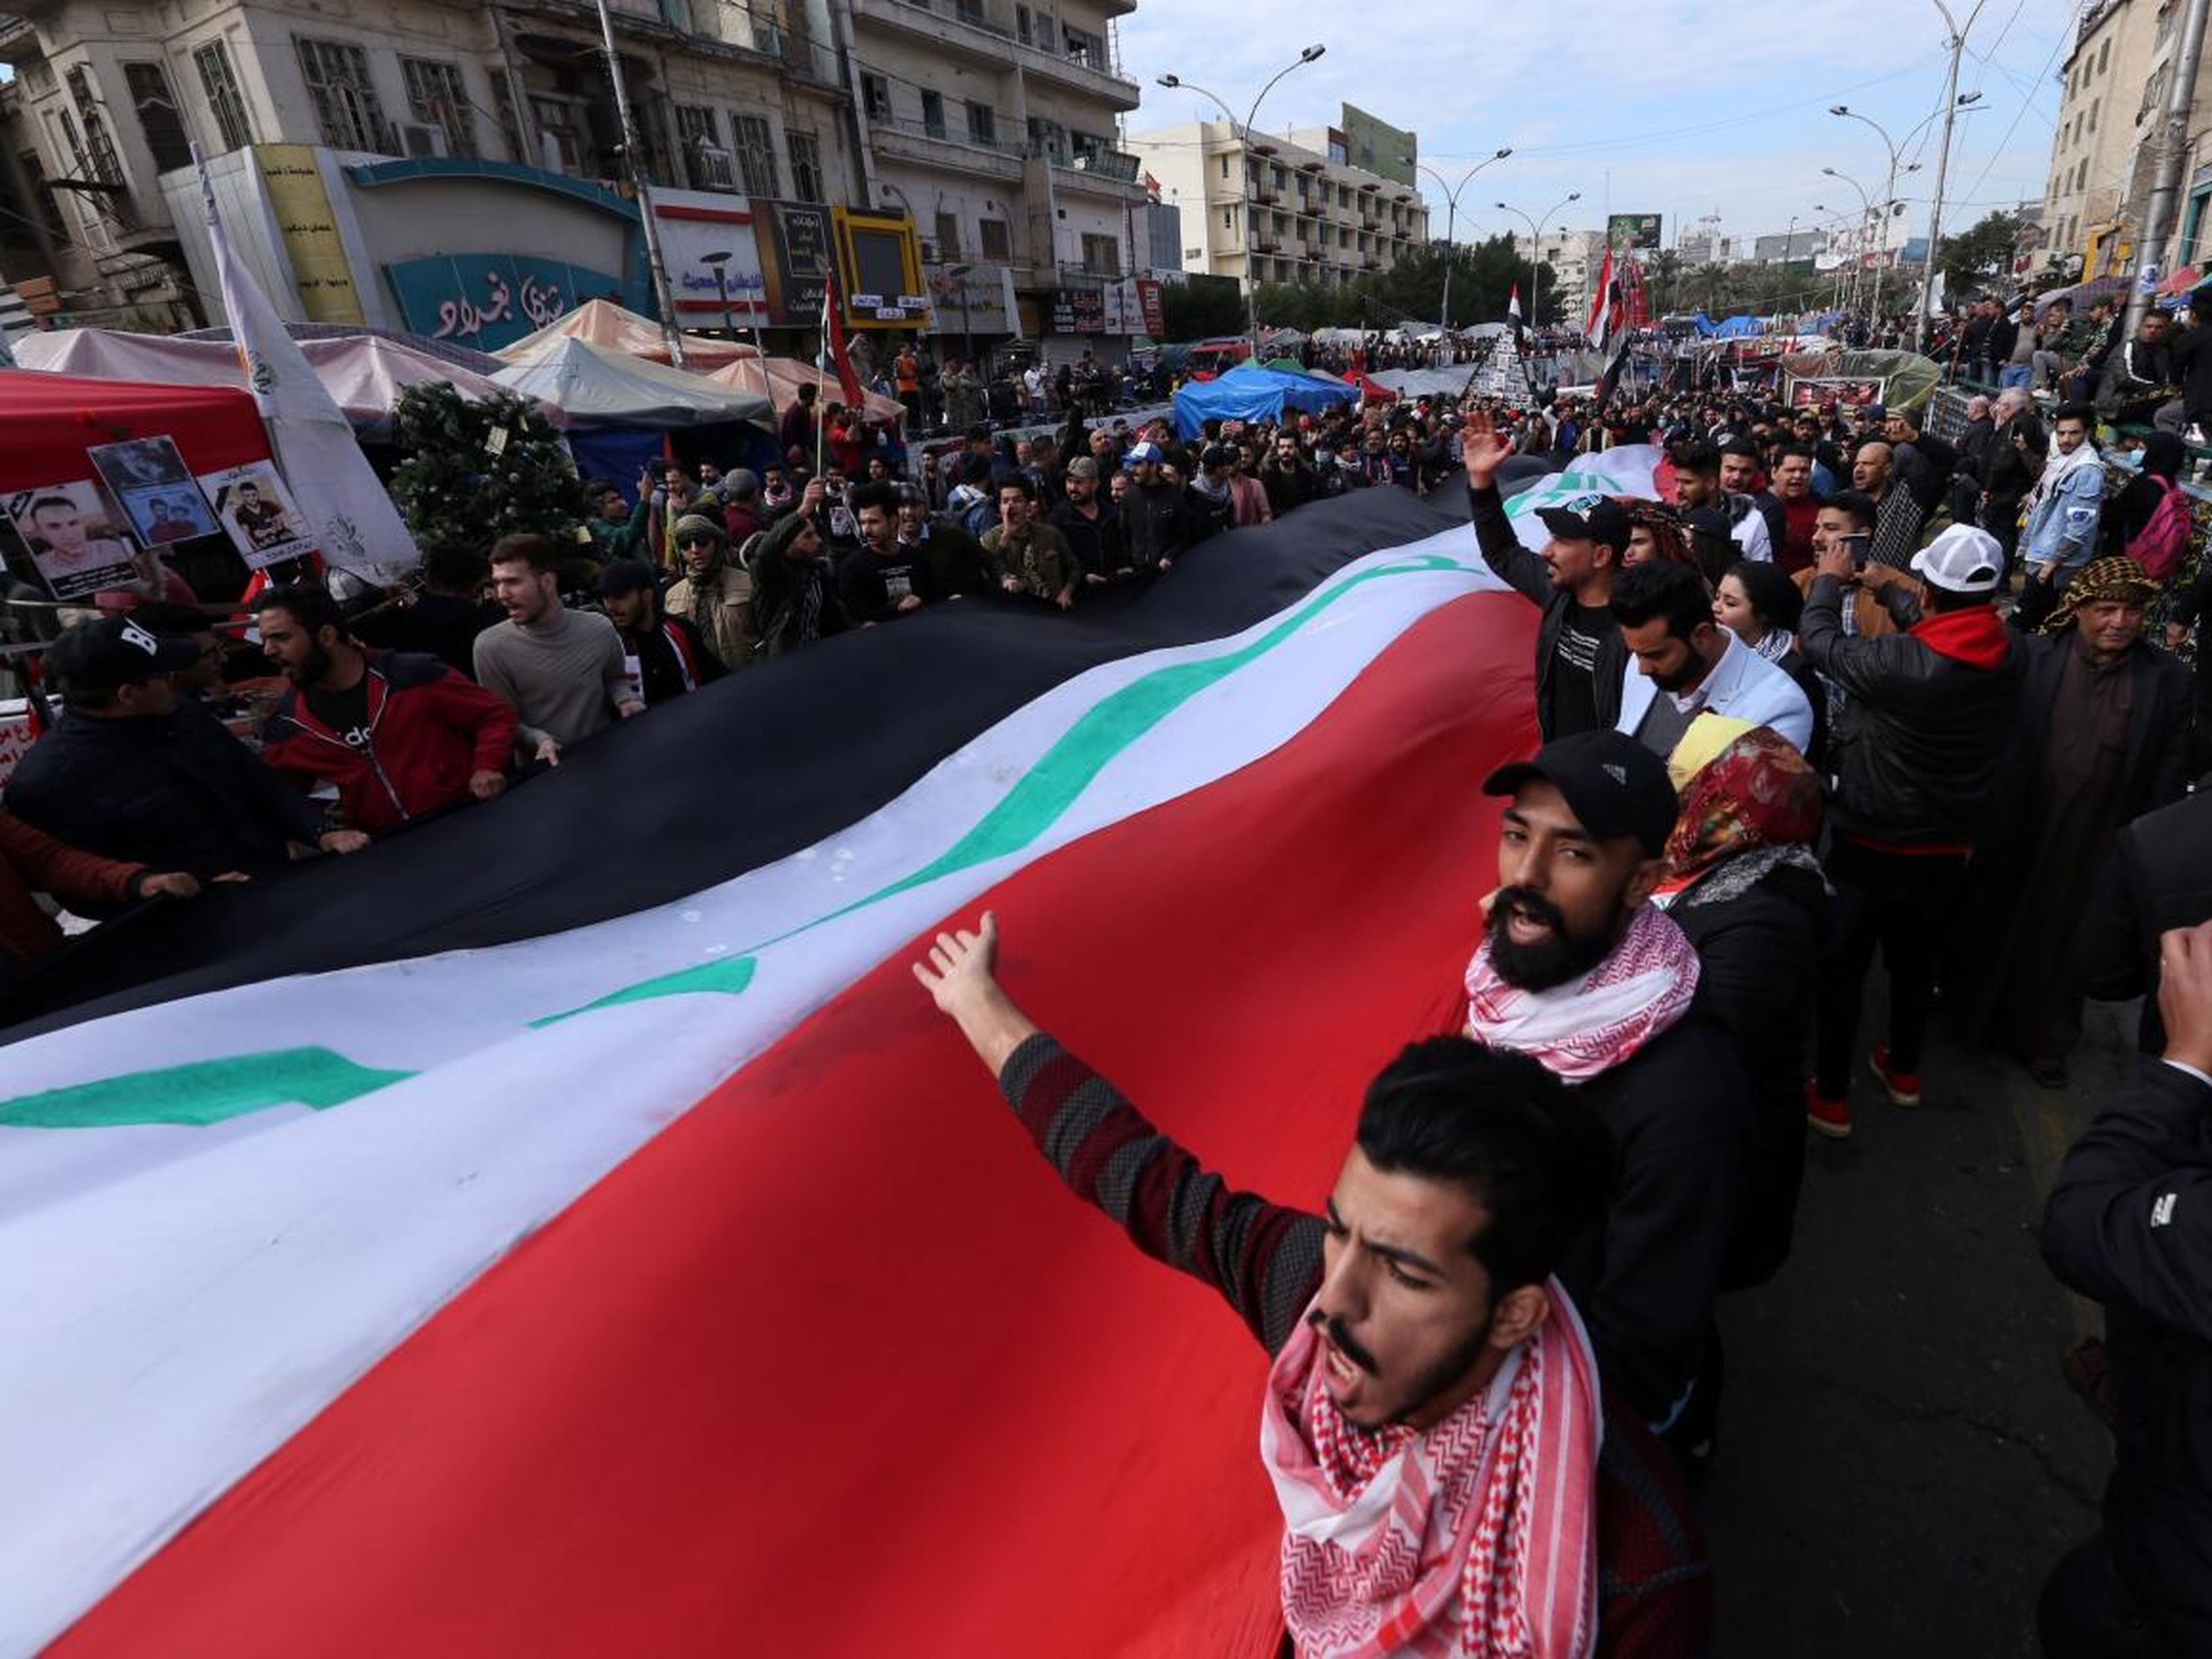 Anti-government protests have been ongoing in Iraq since October 2019, when the government enforced internet blackouts.